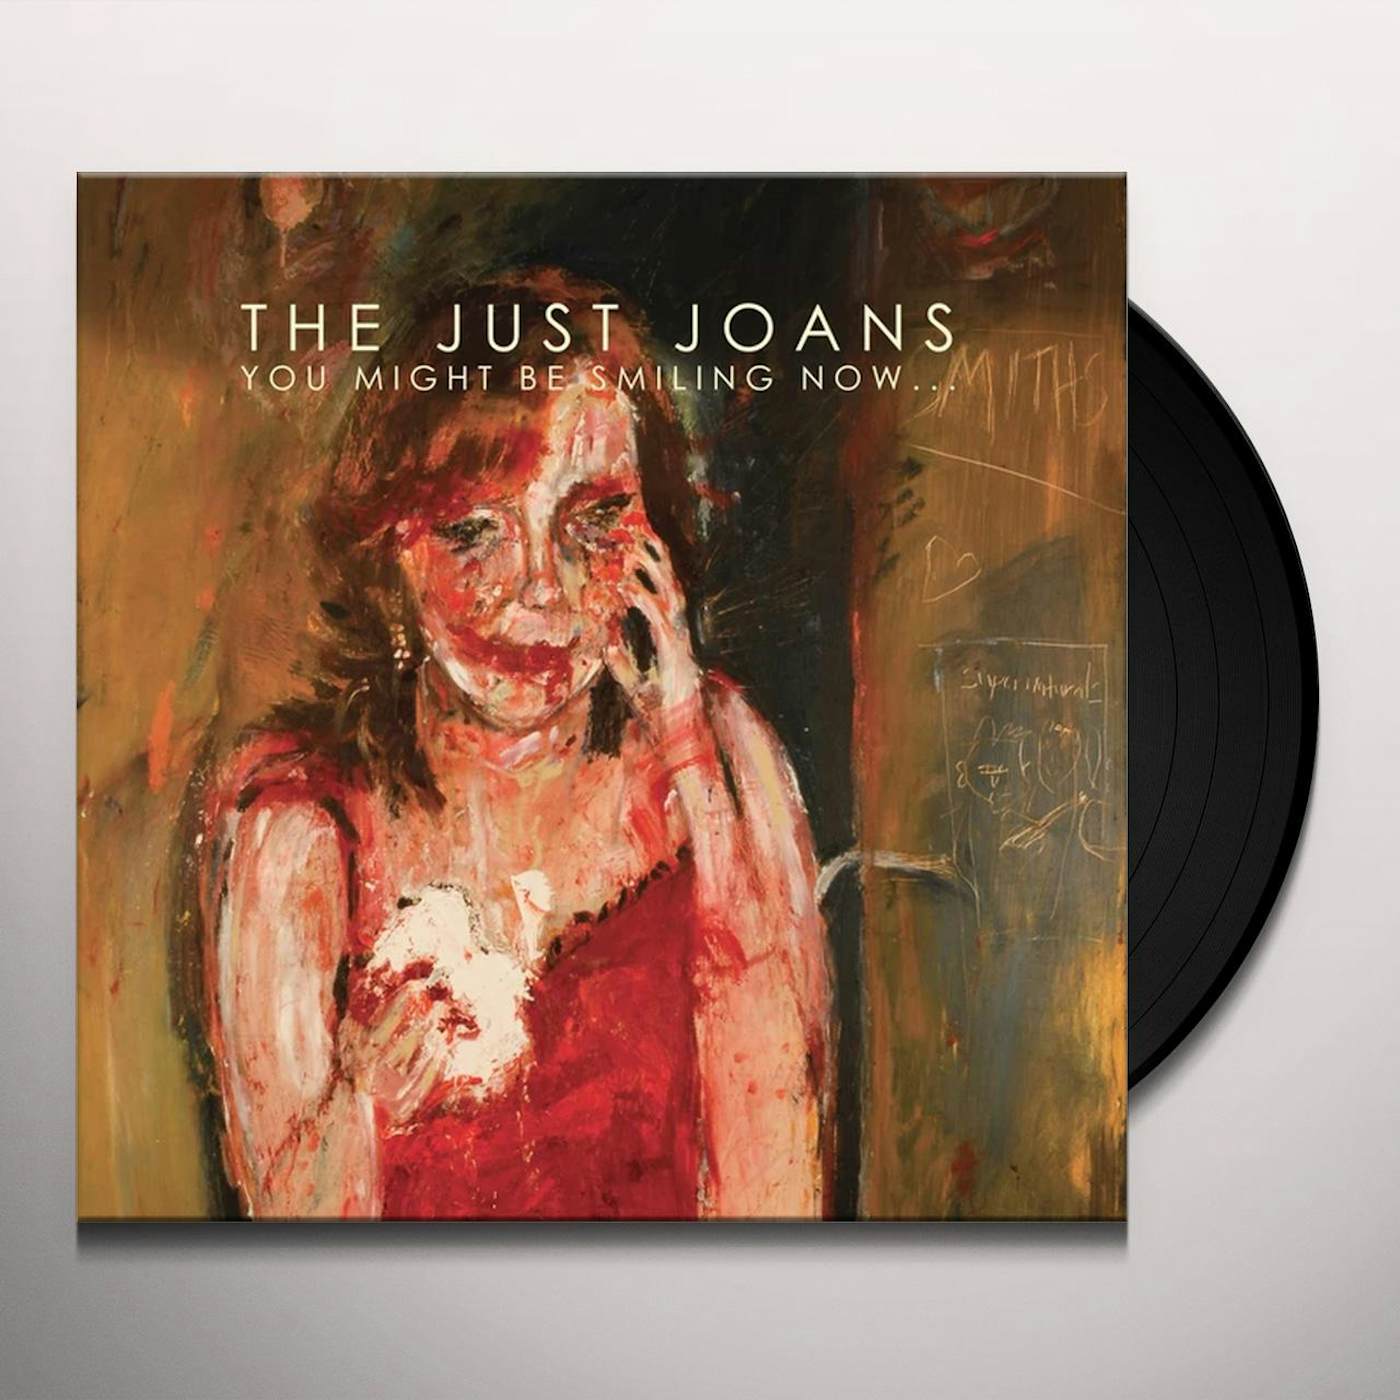 The Just Joans You Might Be Smiling Now Vinyl Record